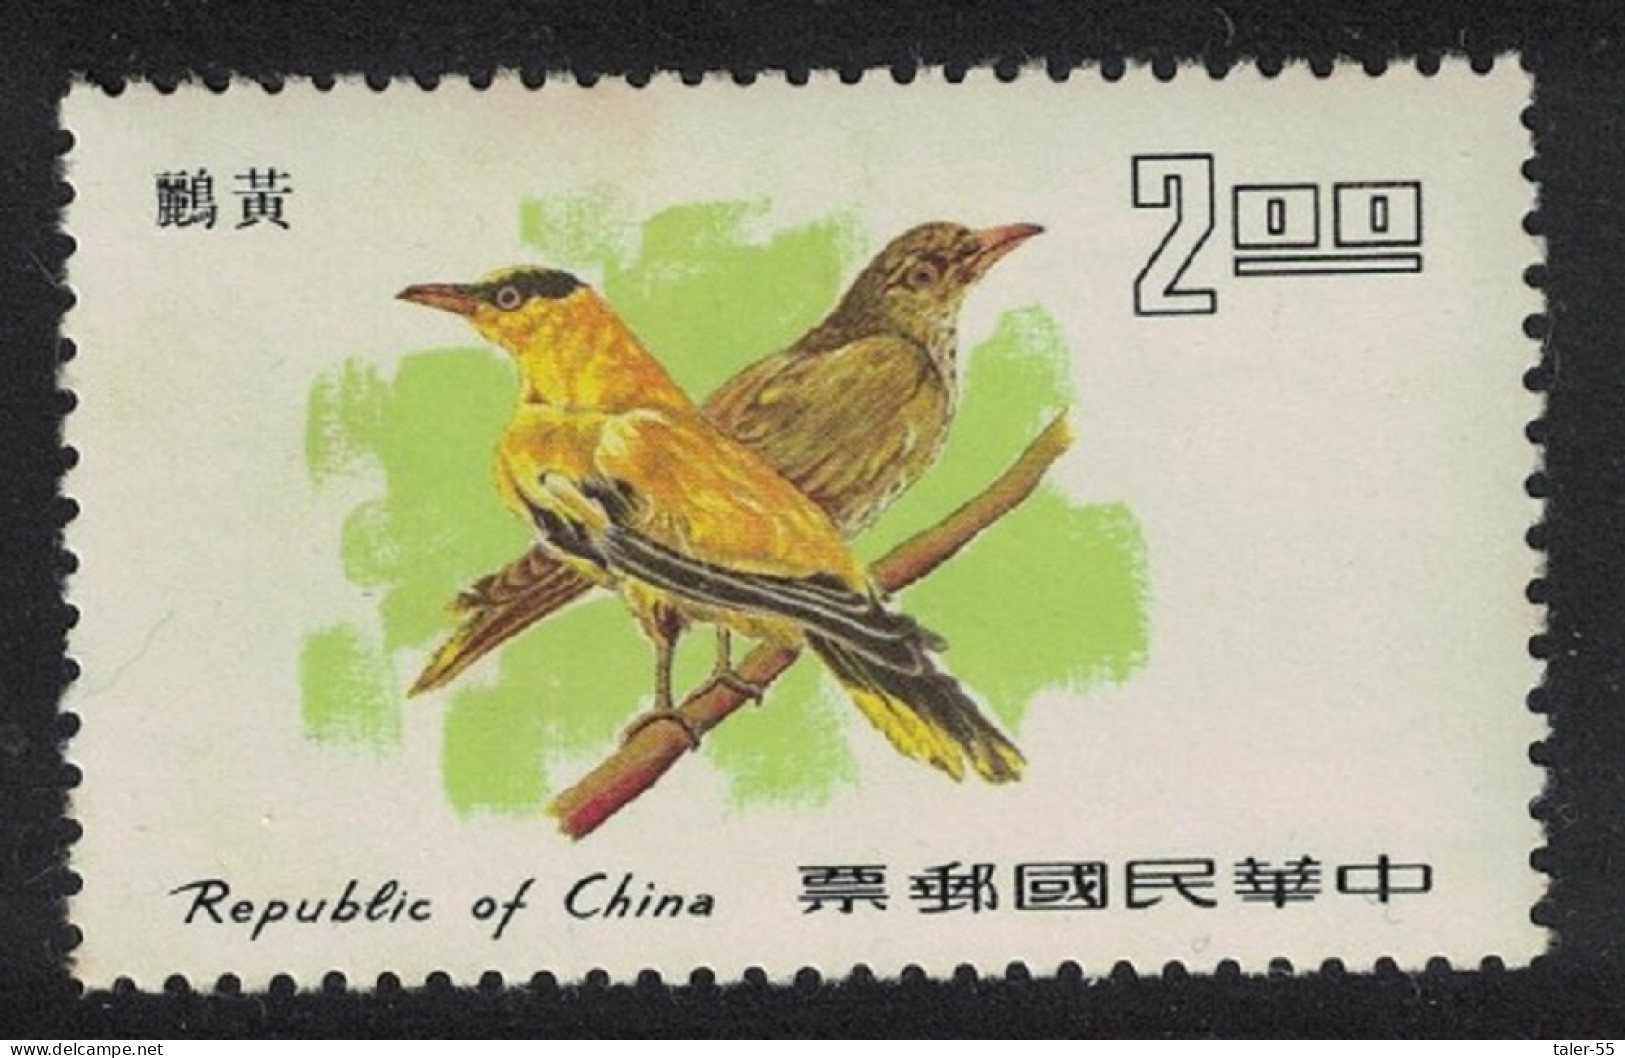 Taiwan Black-naped Orioles Birds $2 Def 1977 SG#1134 - Unused Stamps